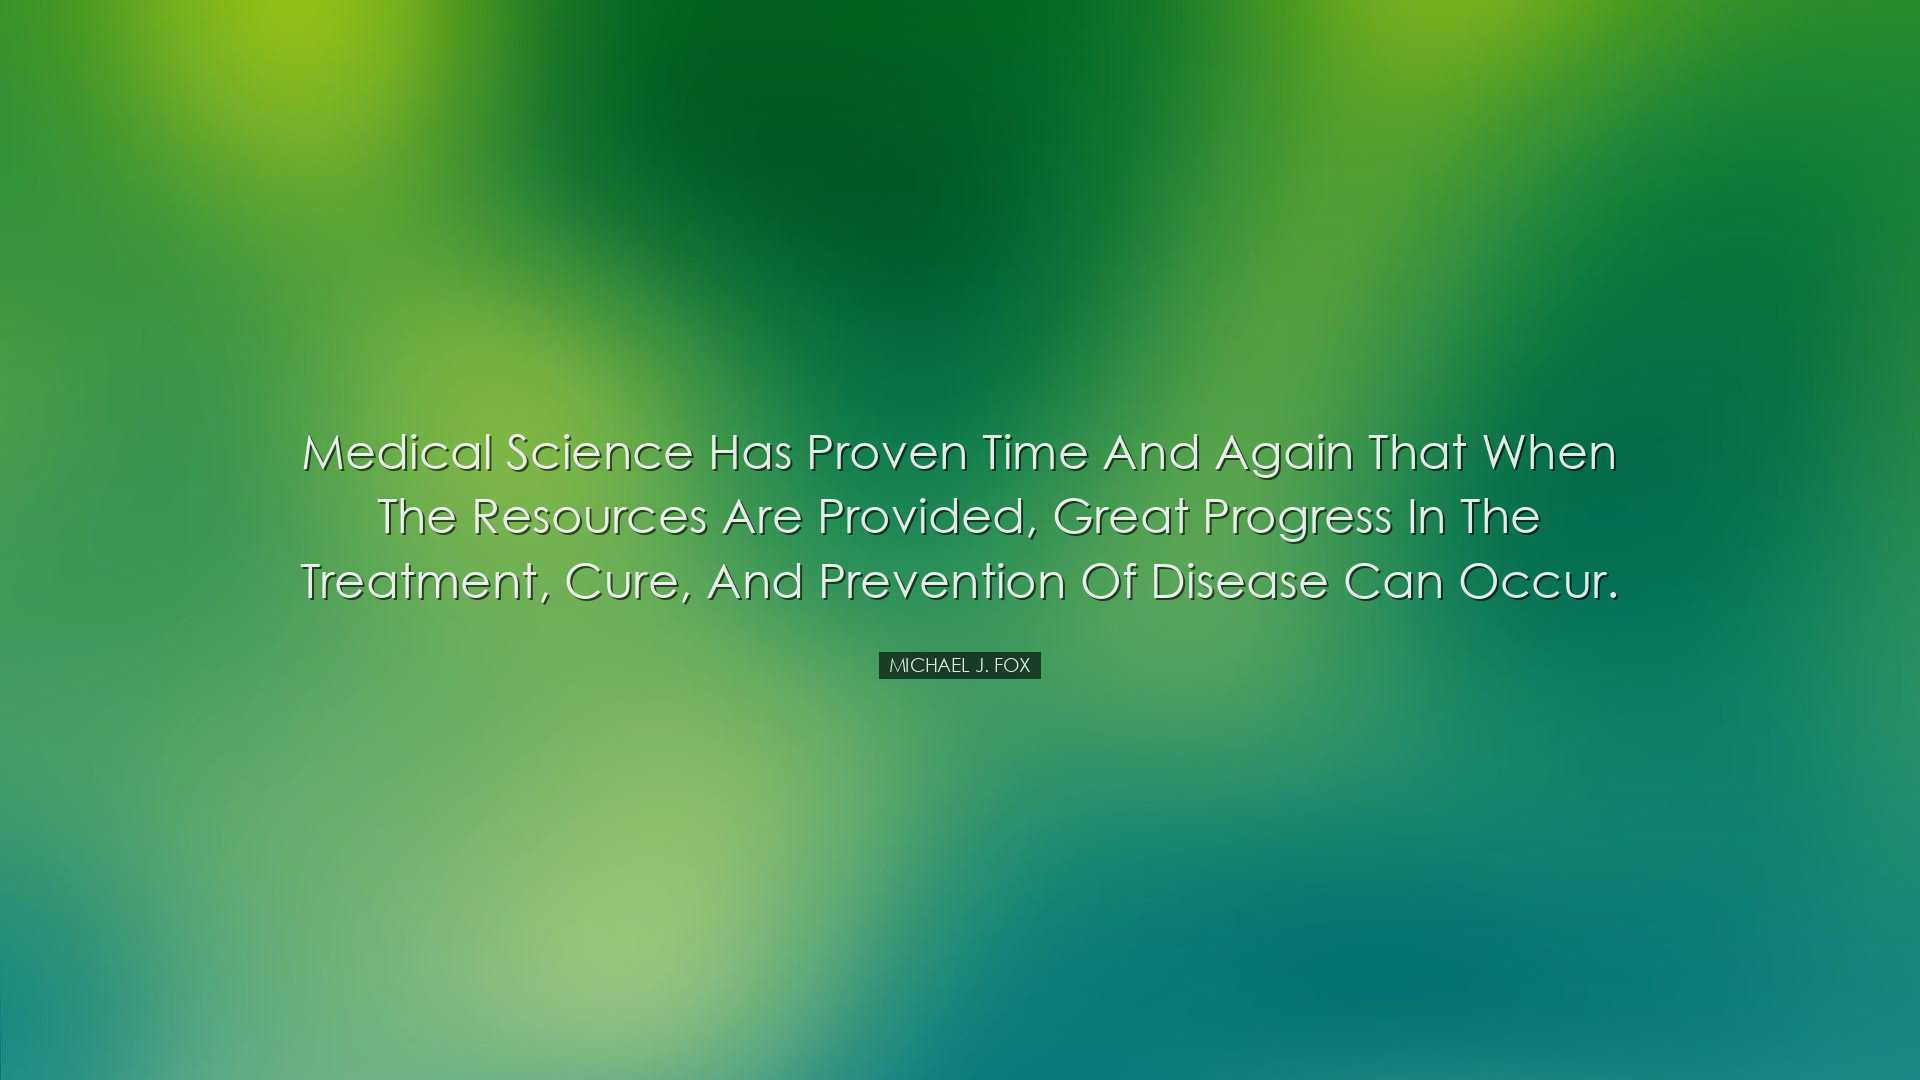 Medical science has proven time and again that when the resources